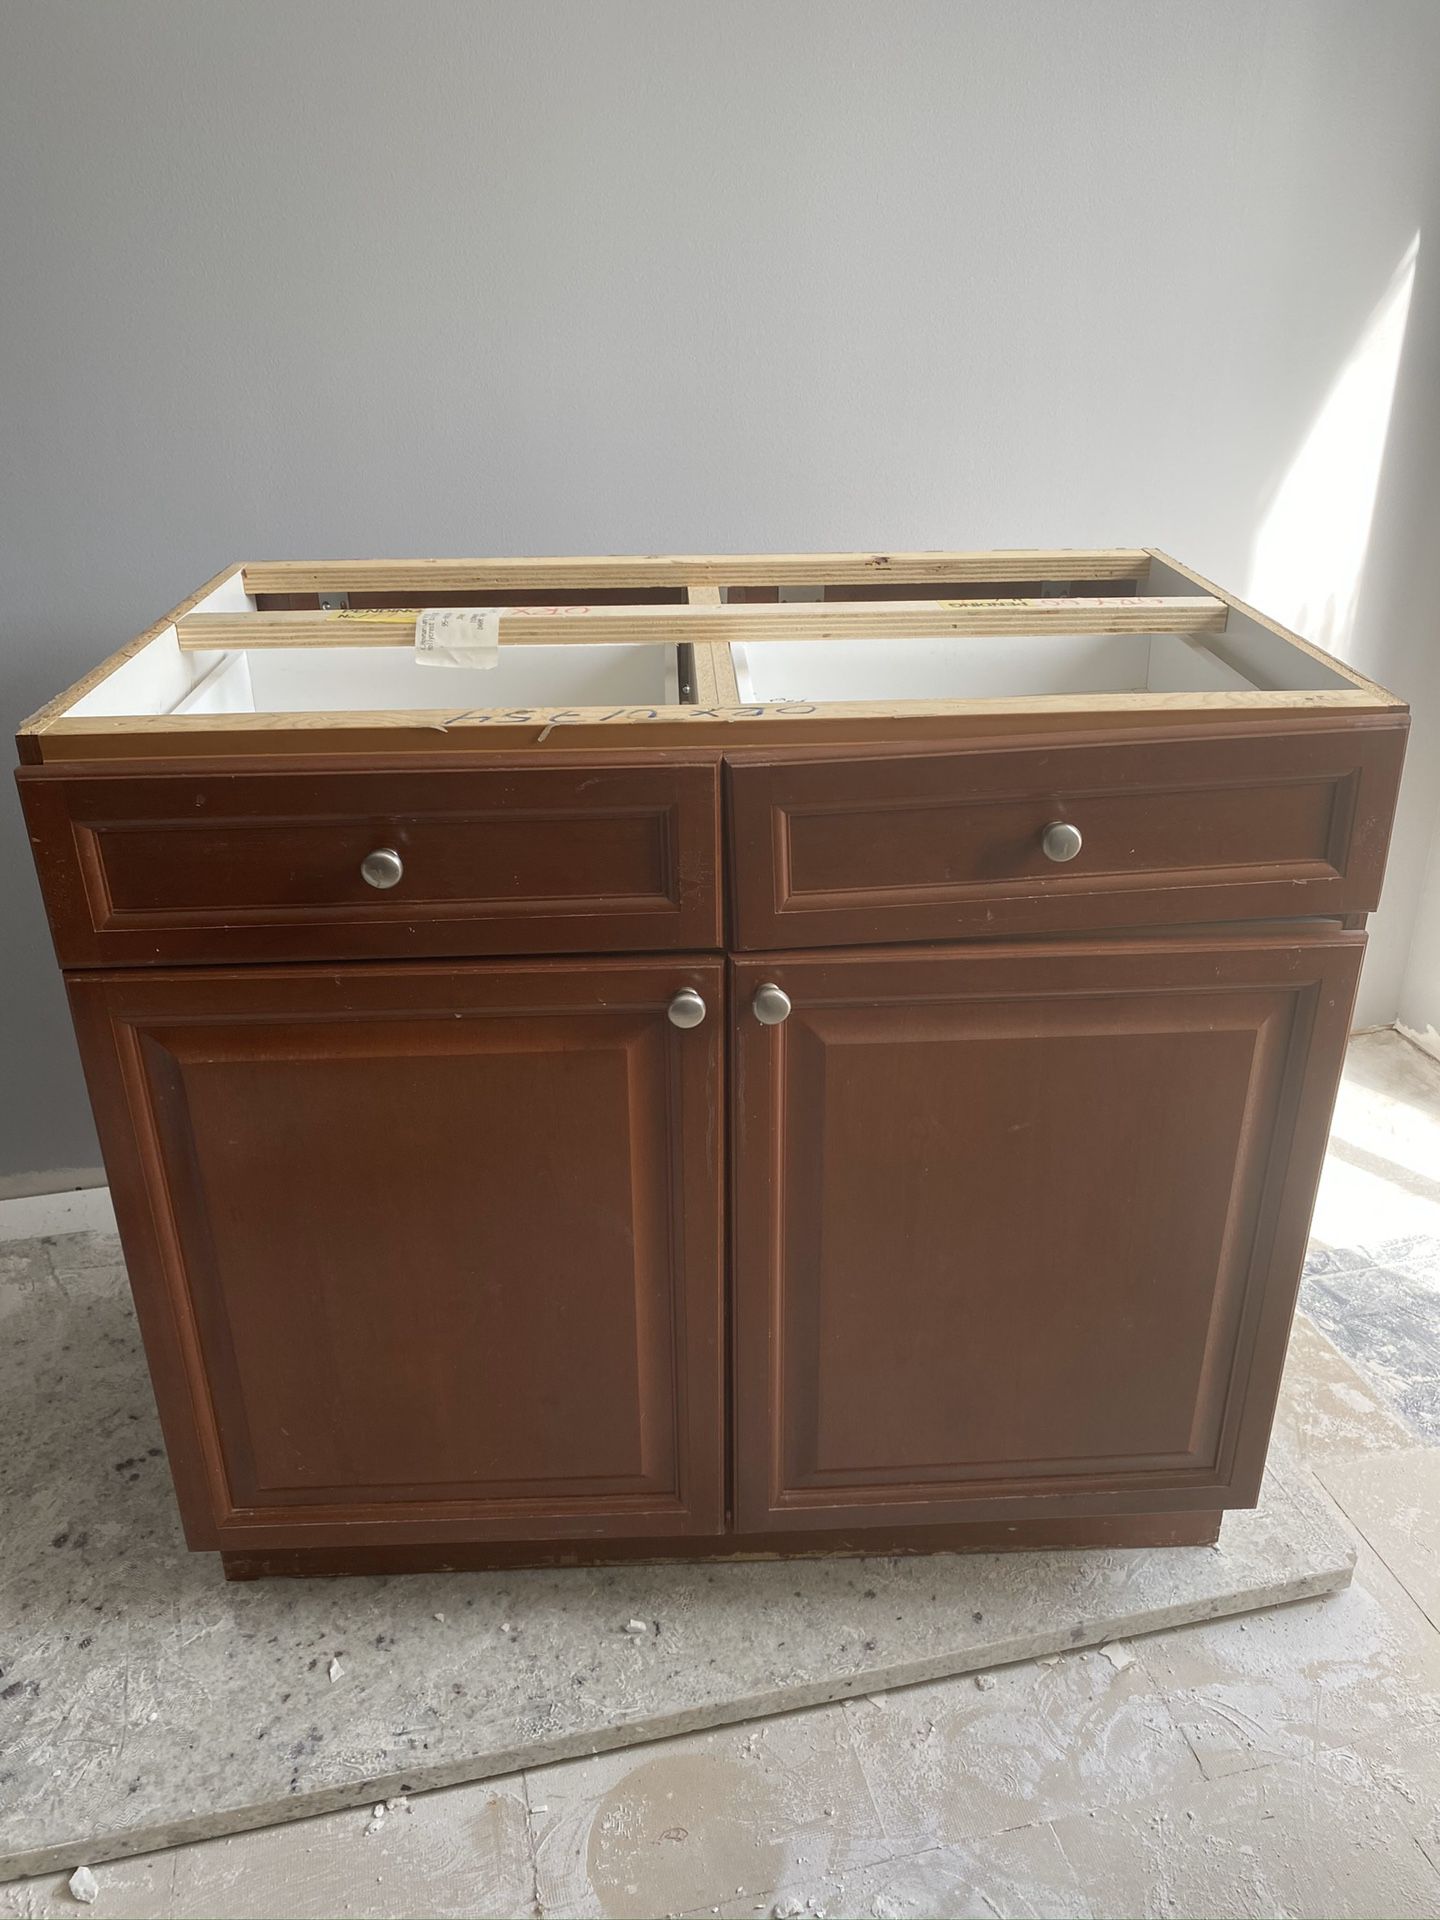 Great used kitchen cabinets